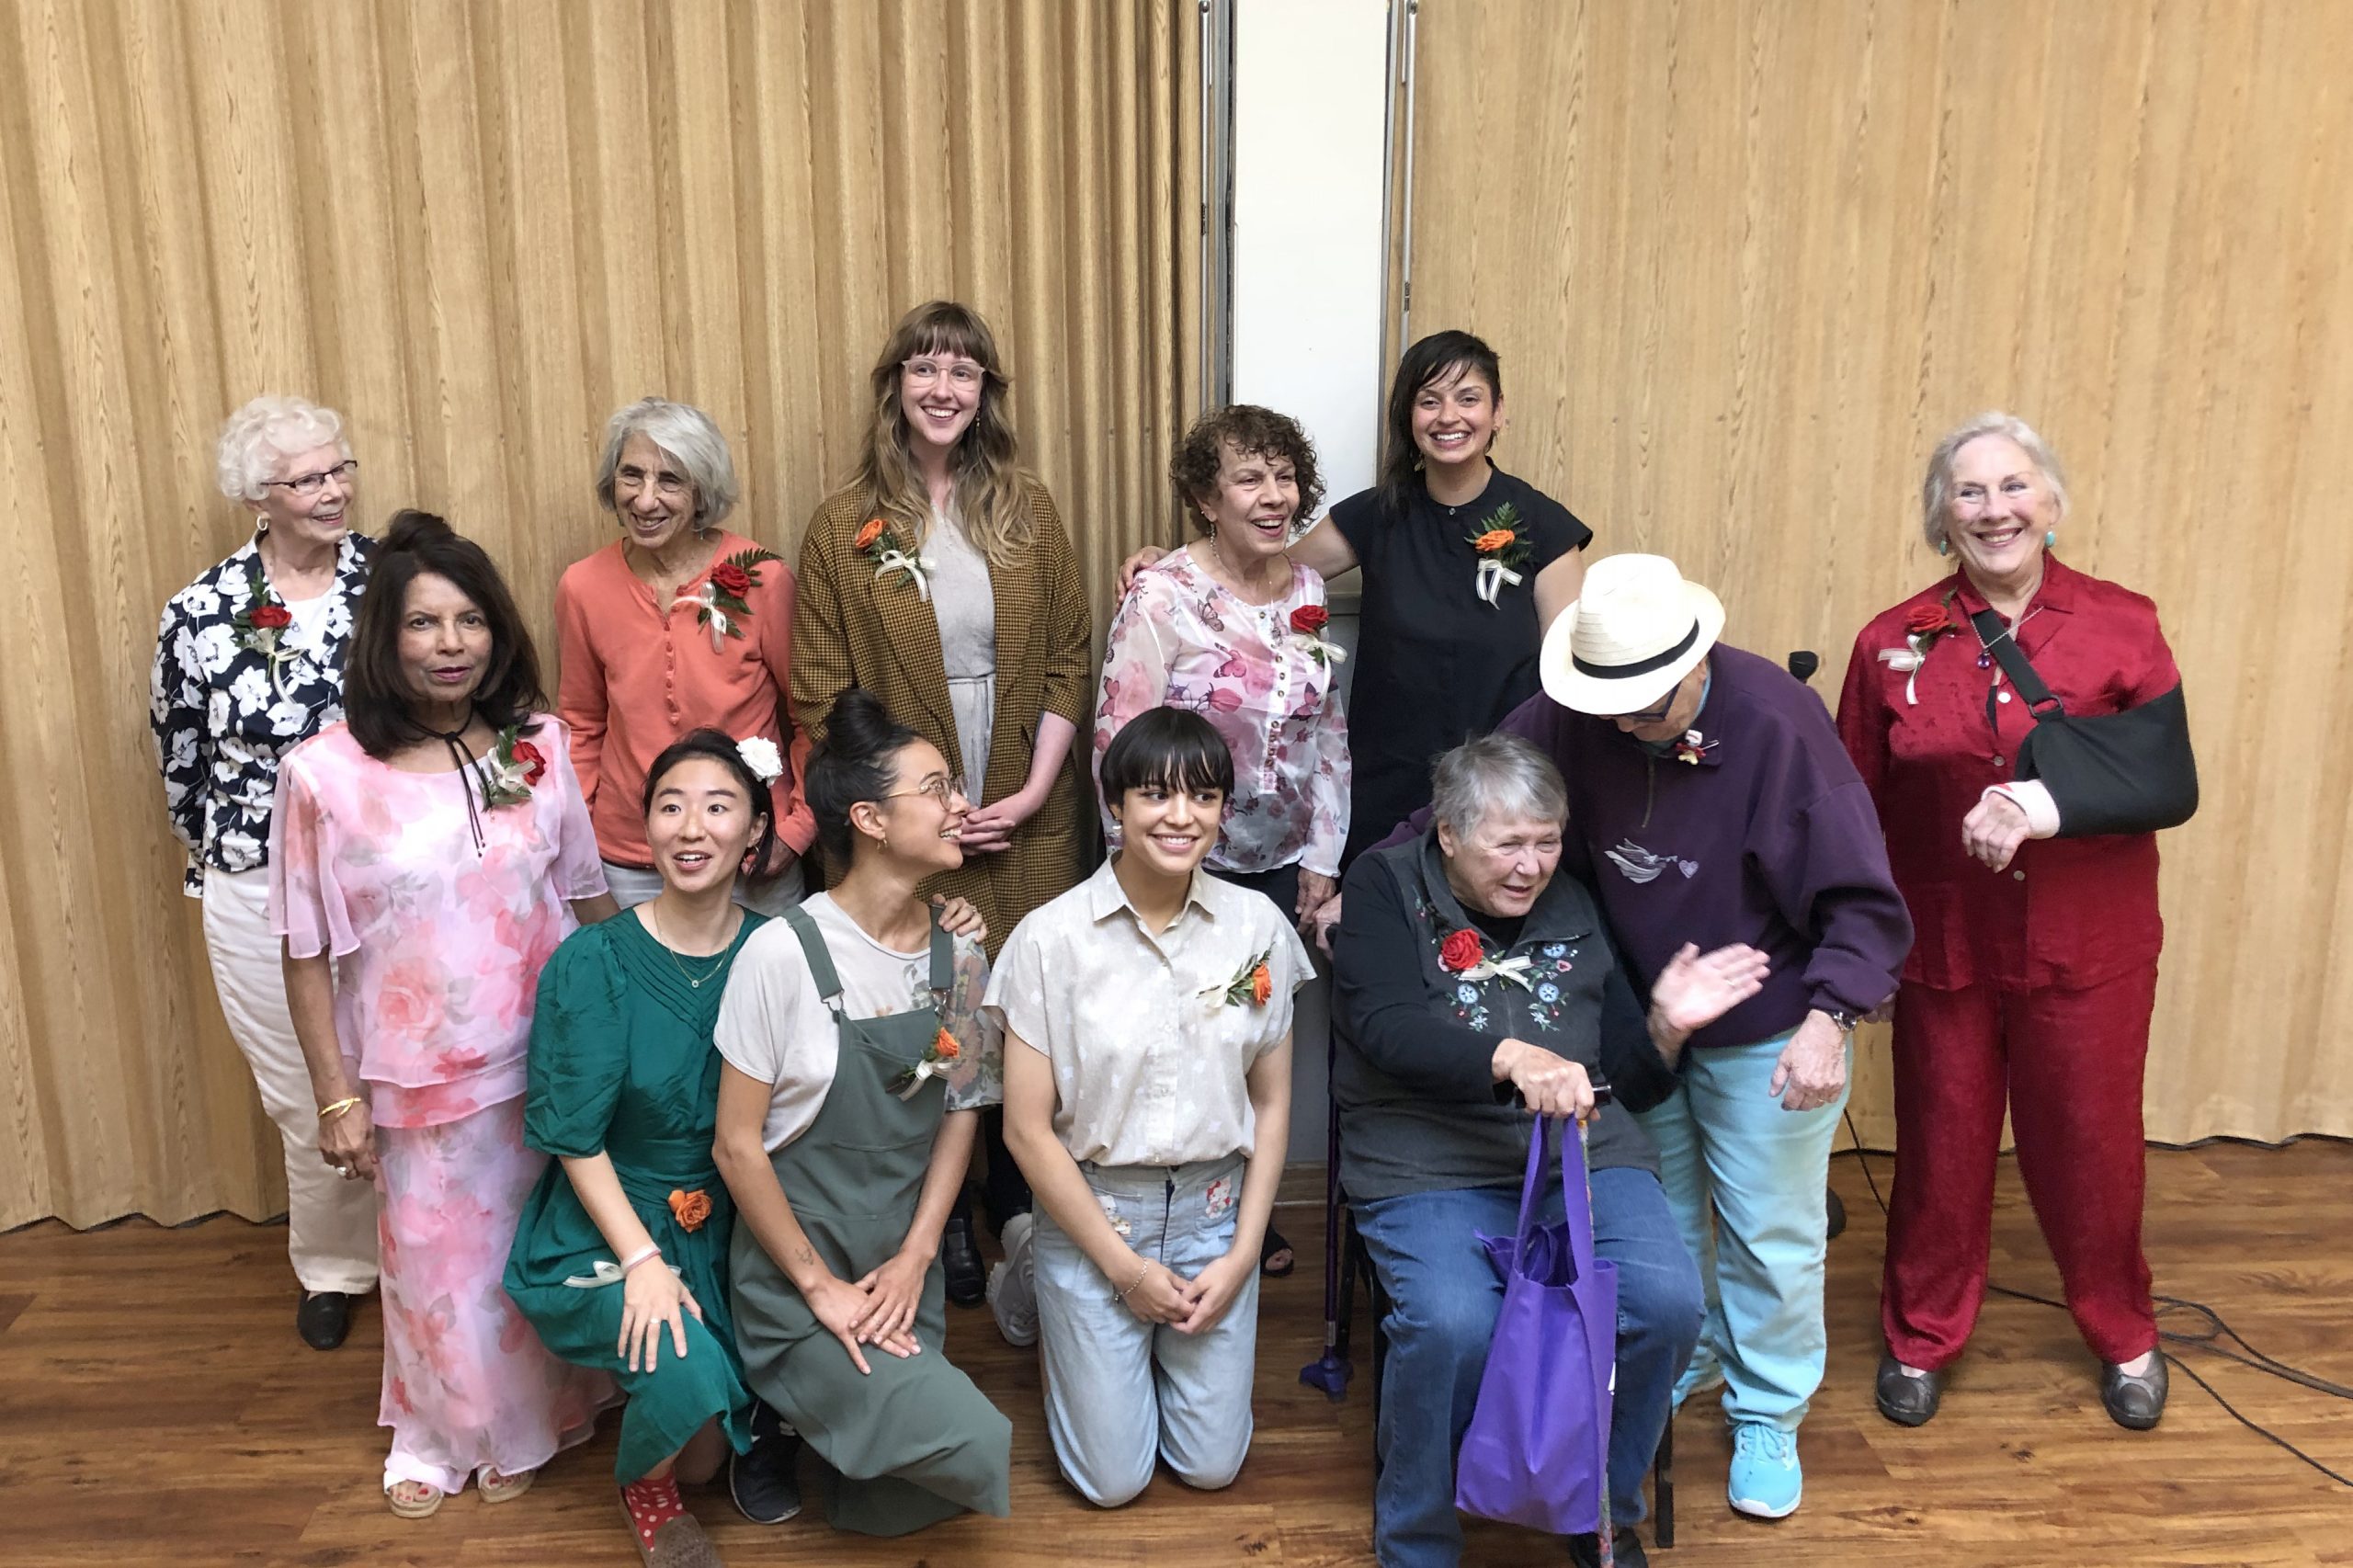 Group photo of collaborators for The Grandma Reporter Issue 2: Intimacy, Portland OR, USA, 2019 (Back row, from left) Sharon Cooper, Susan Green, Erika Dedini, Jacqui Jackson, Roshani Thakore, Maureen Phillips. (Front row, from left), Tammy B, Salty Xi Jie Ng, Crystal Sasaki, Valerie Wrede, Betty Canham, Mary. (Missing collaborators: Mildred Winters, Ellen Gee, Pamela Sky Jeanne)